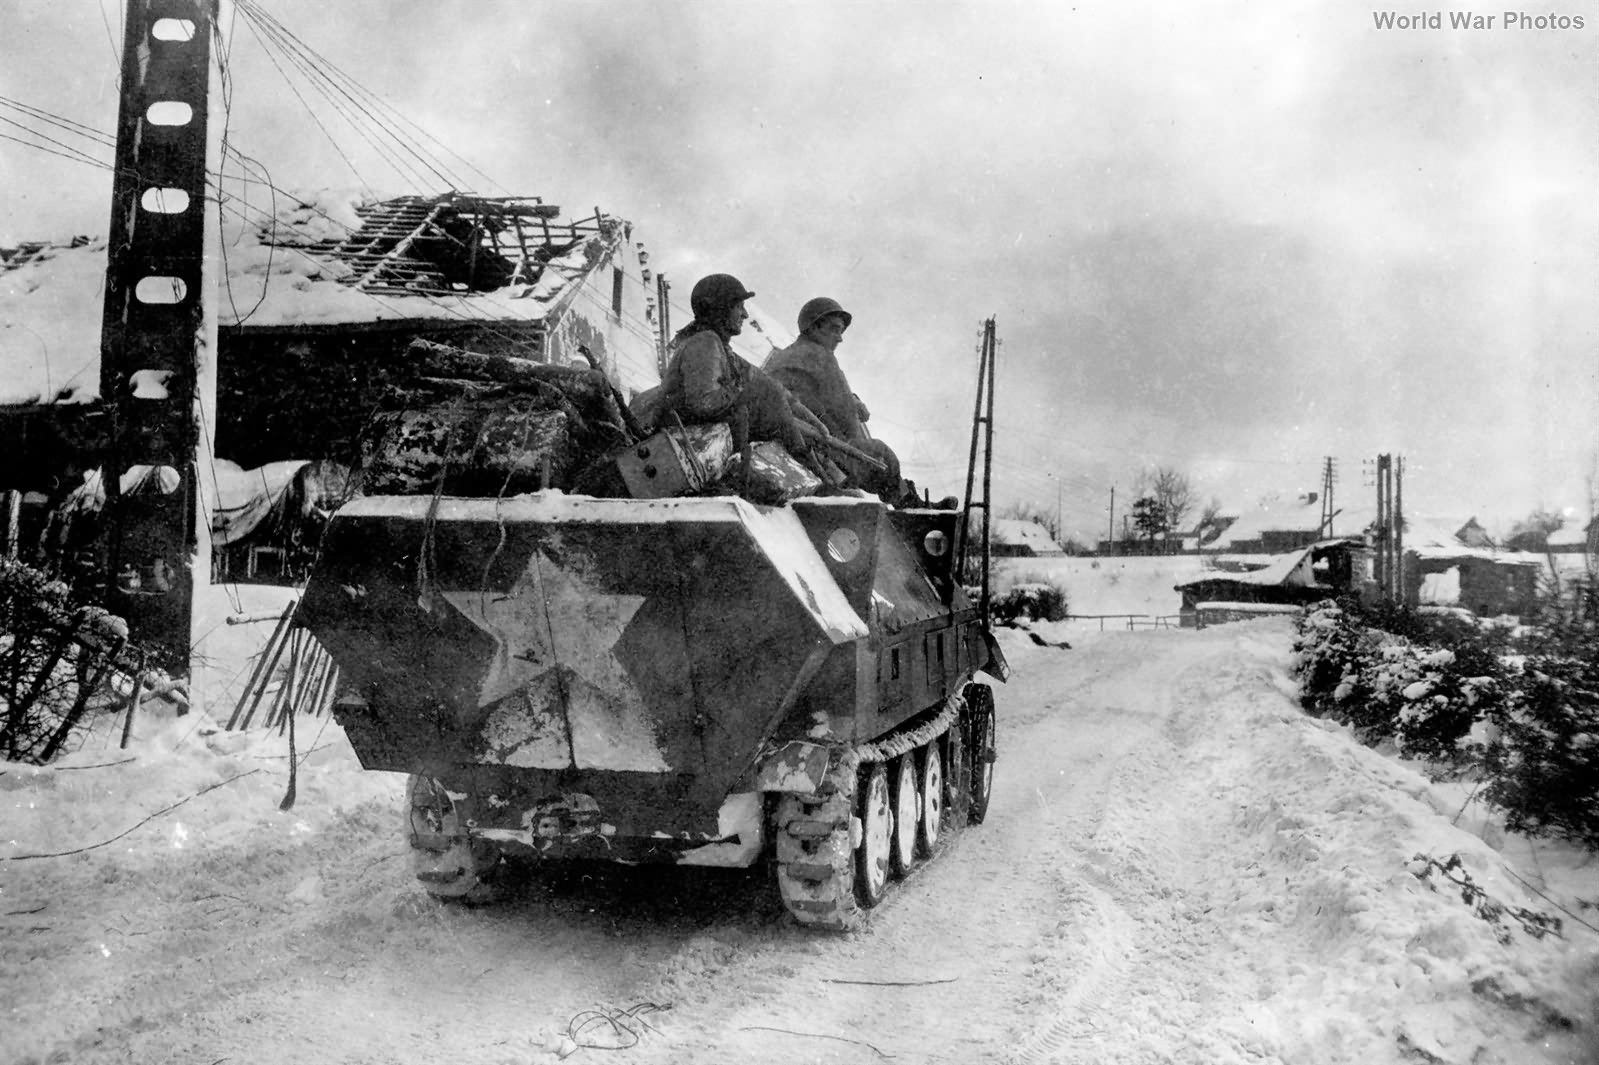 1st Infantry Division troops use SdKfz 251 in Schoppen Bulge 22 January 1945